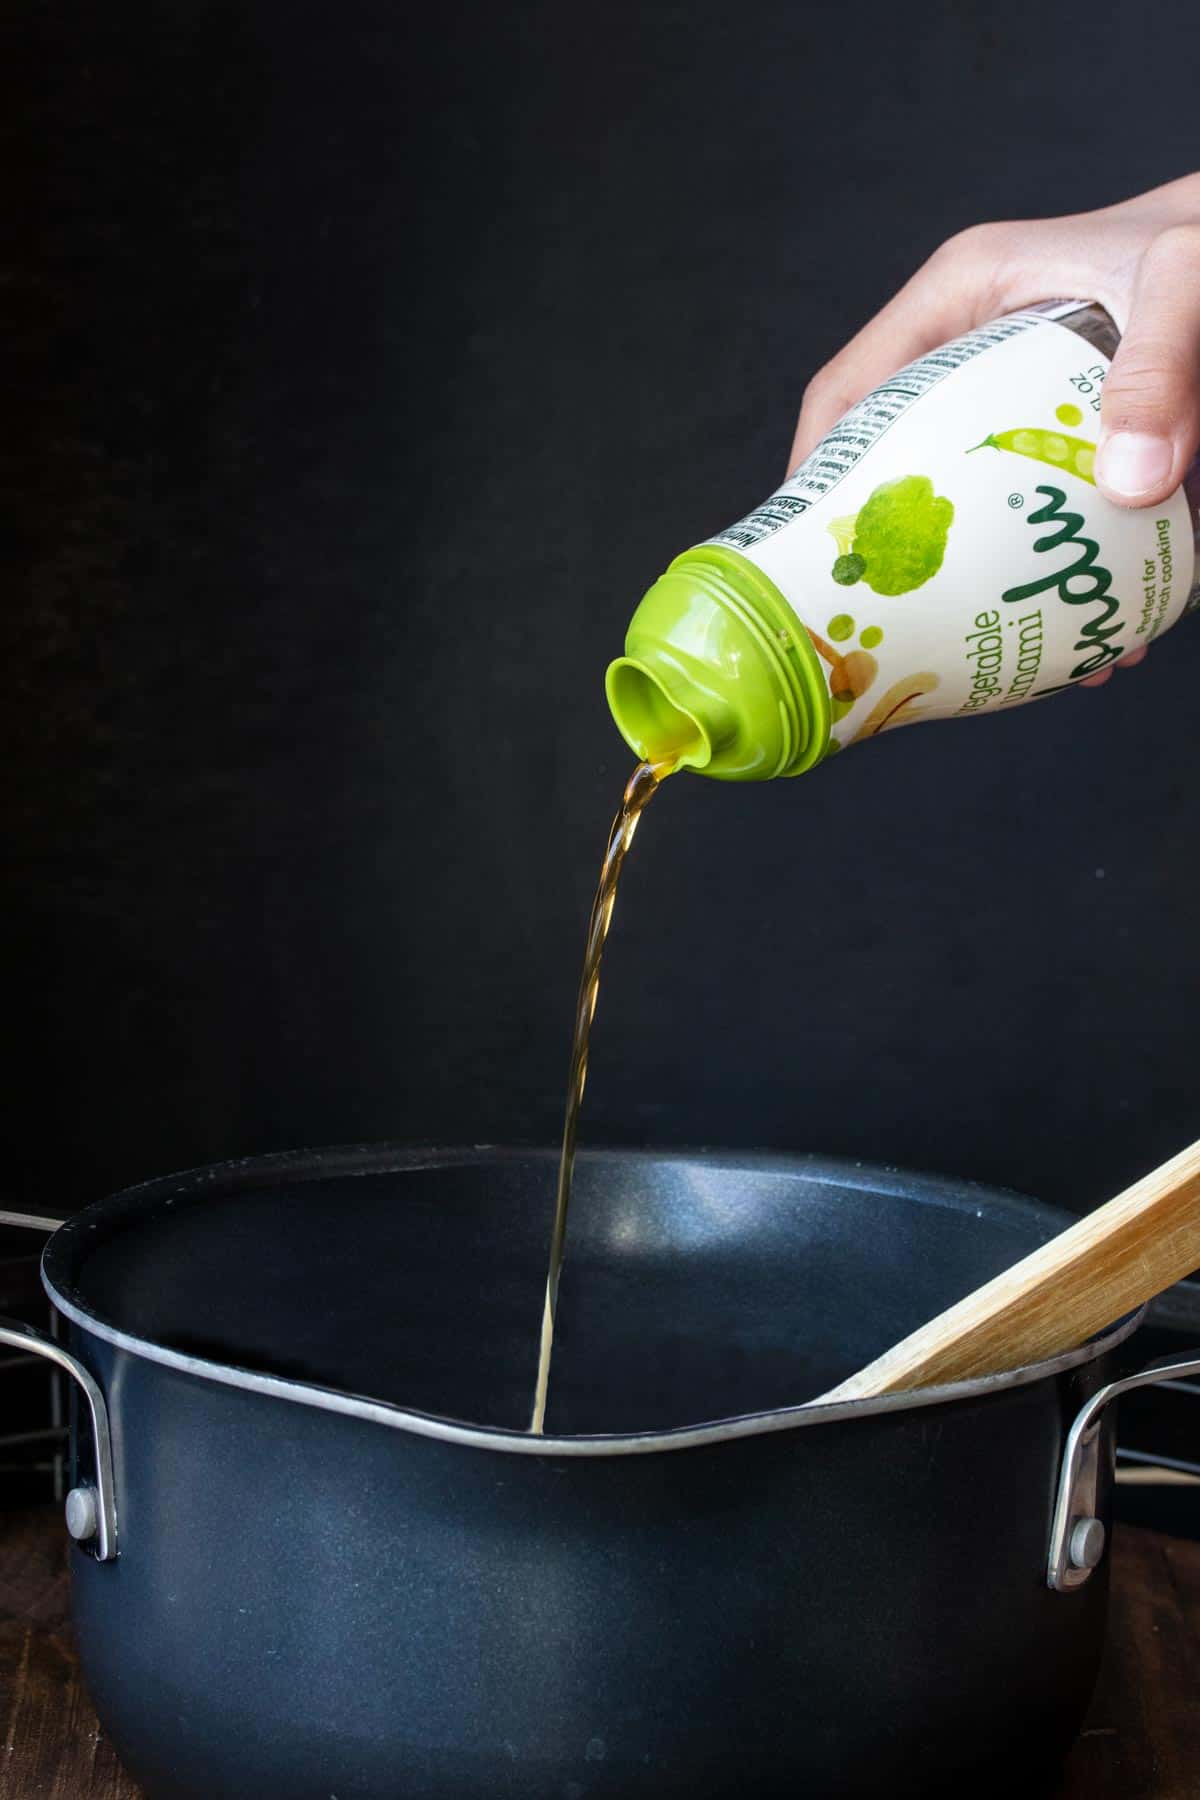 Hand pouring liquid out of a green and white container into a pot.